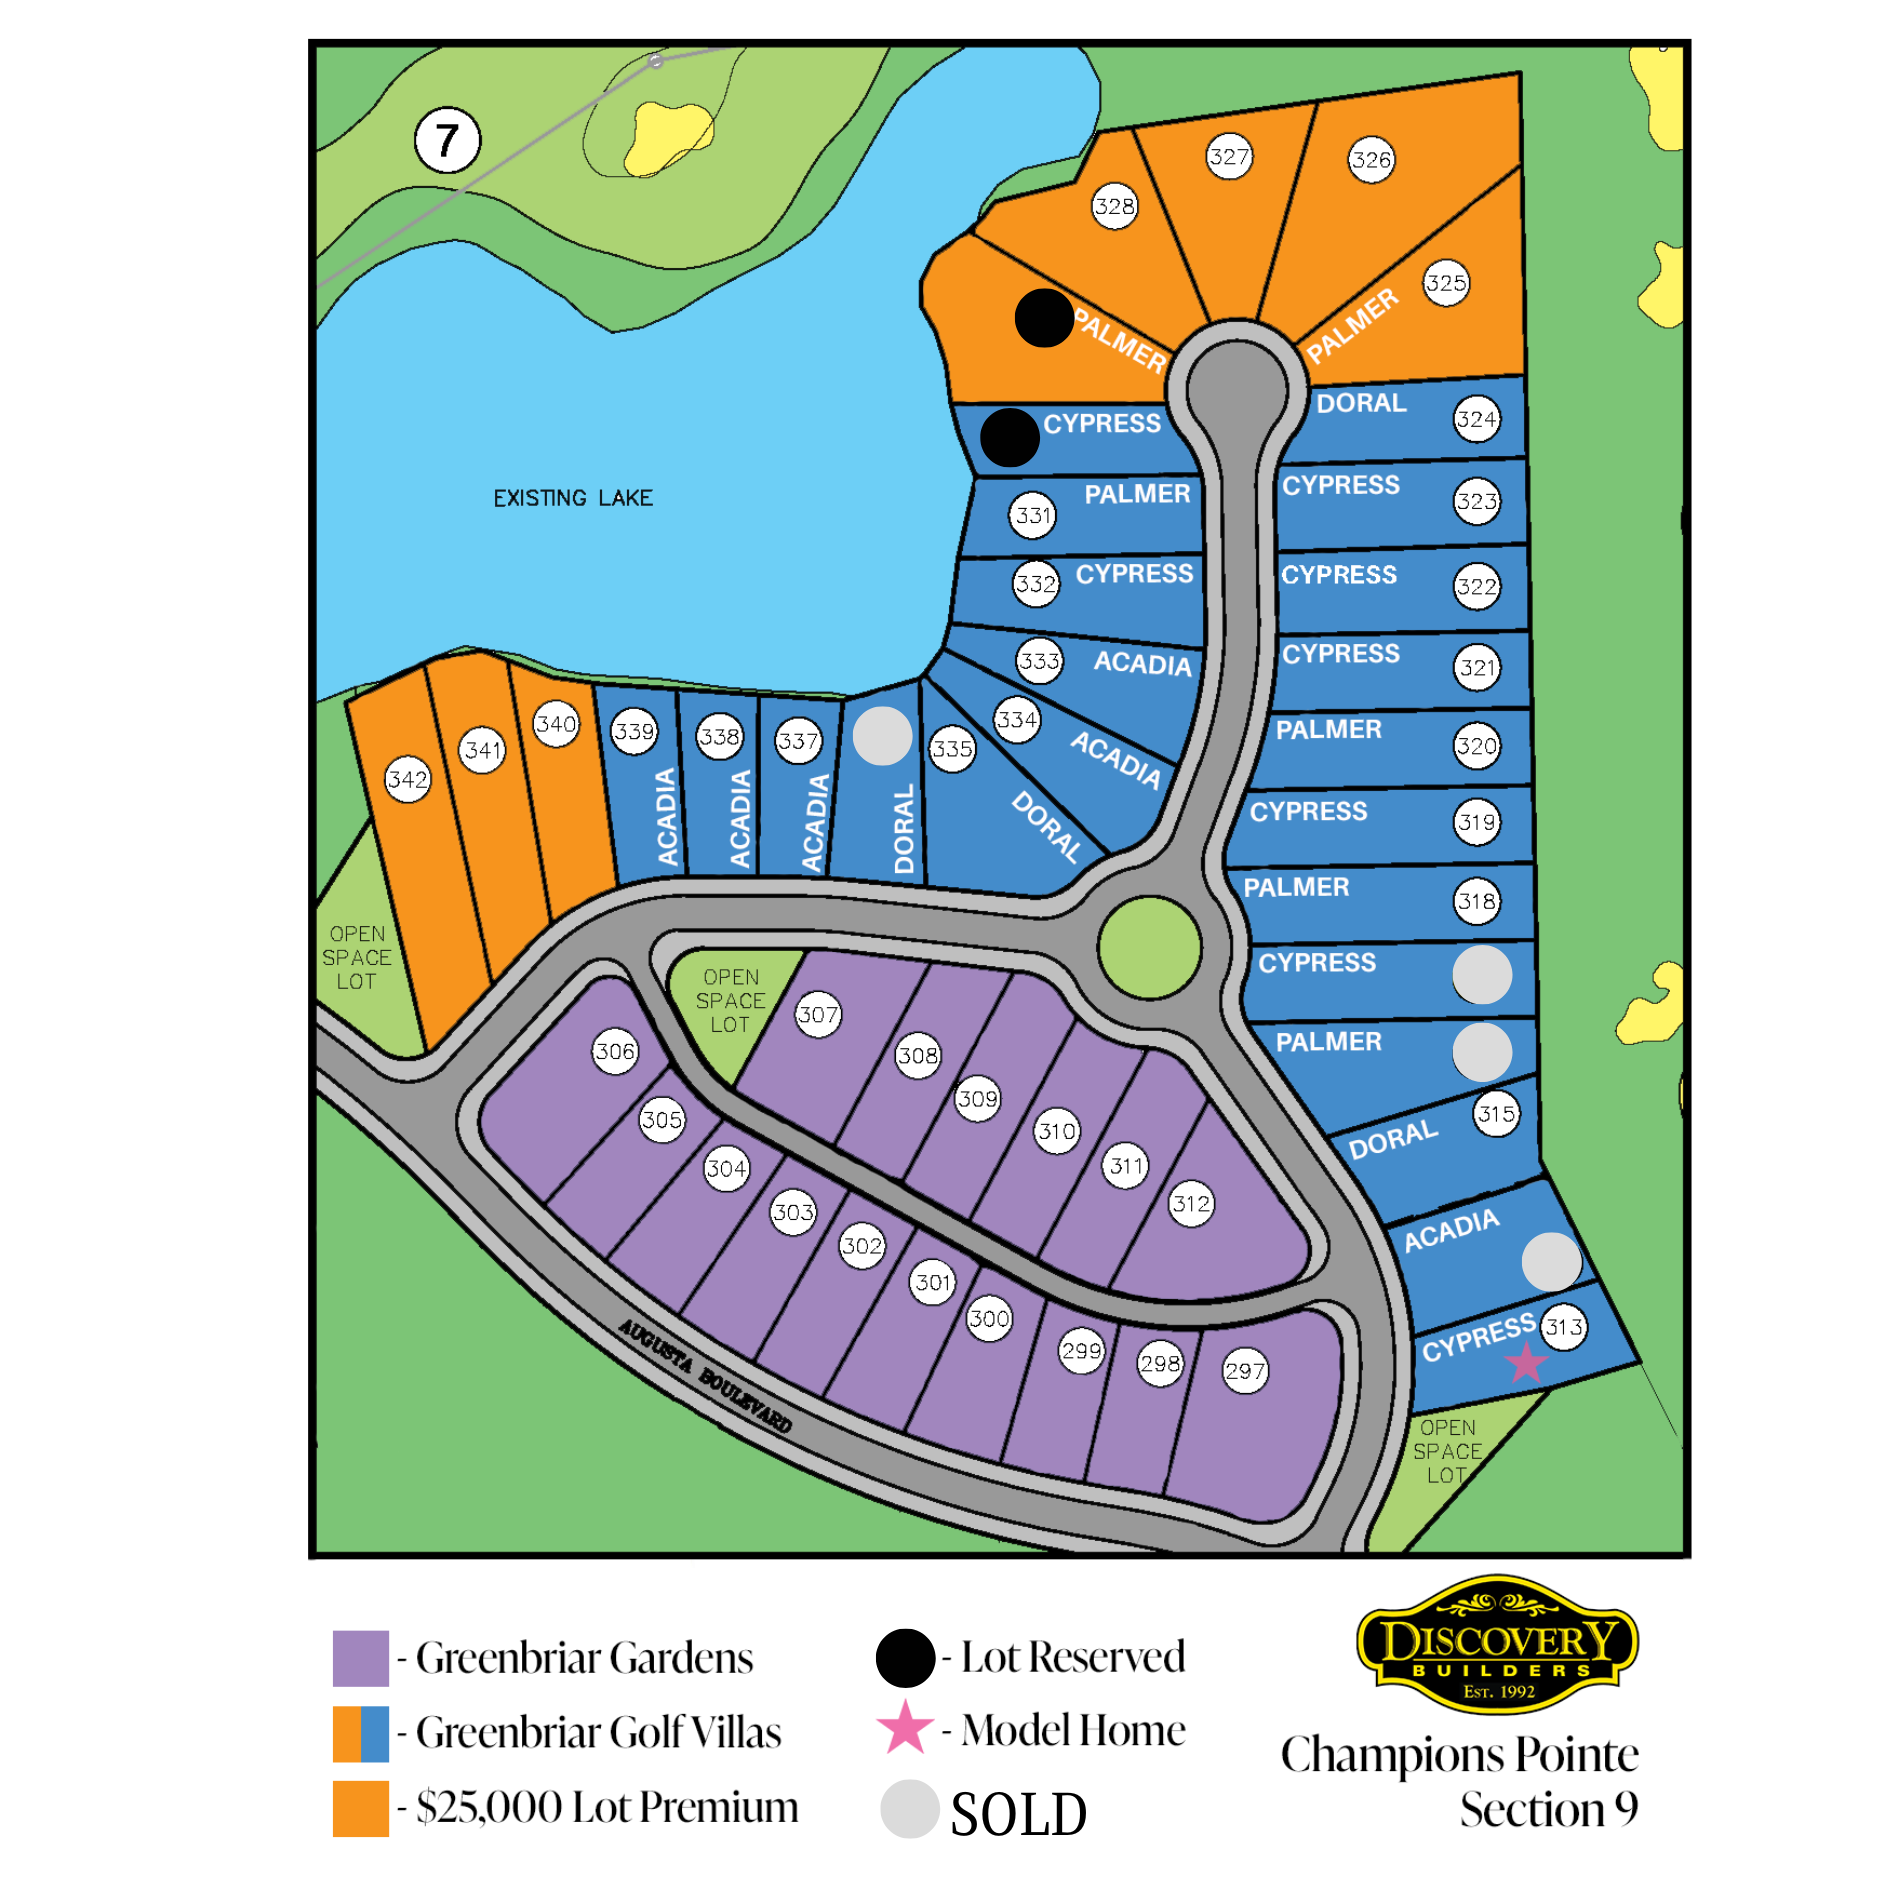 Champions Pointe Section 9  Golf Villas and Gardens plat map